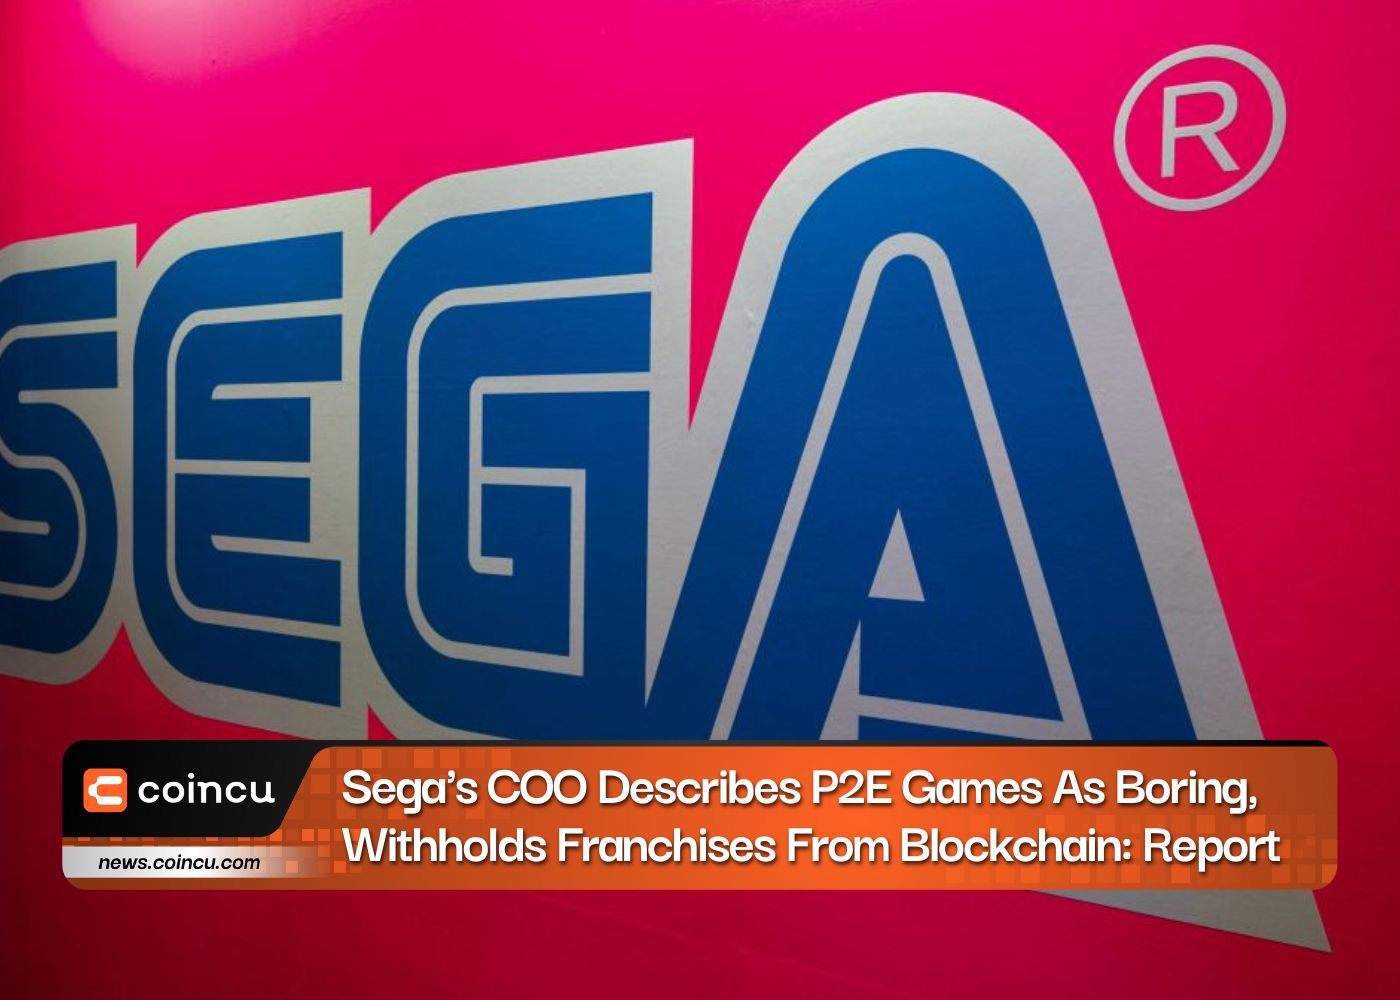 Sega’s COO Describes P2E Games As Boring, Withholds Franchises From Blockchain: Report